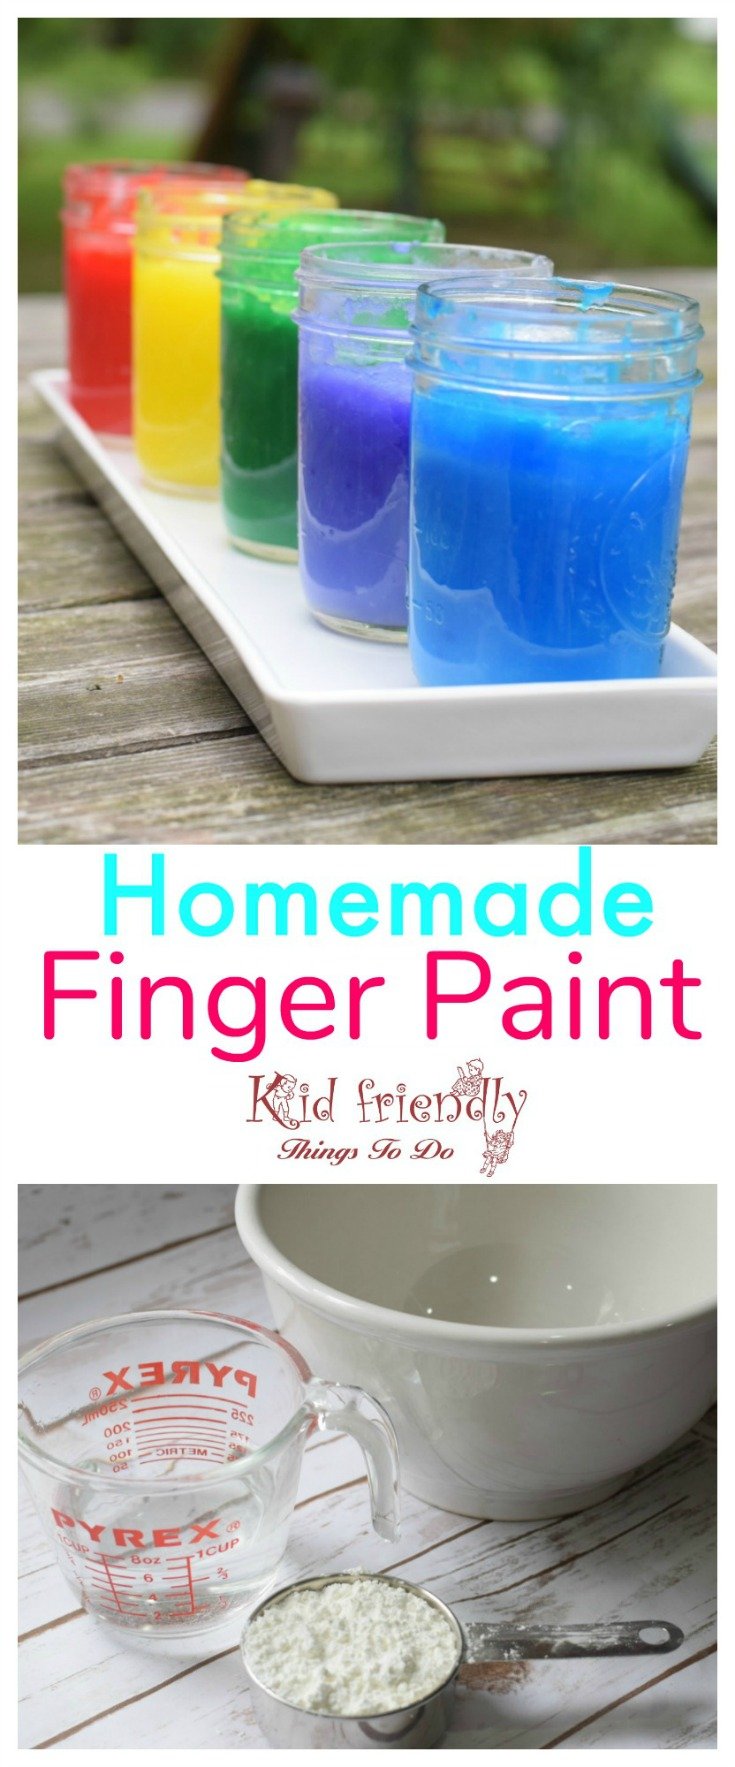 Easy DIY Homemade Finger Paints for kids to have fun with. Perfect craft recipe for summer fun, boredom buster, winter craft, or anytime at all! www.kidfriendlythingstodo.com